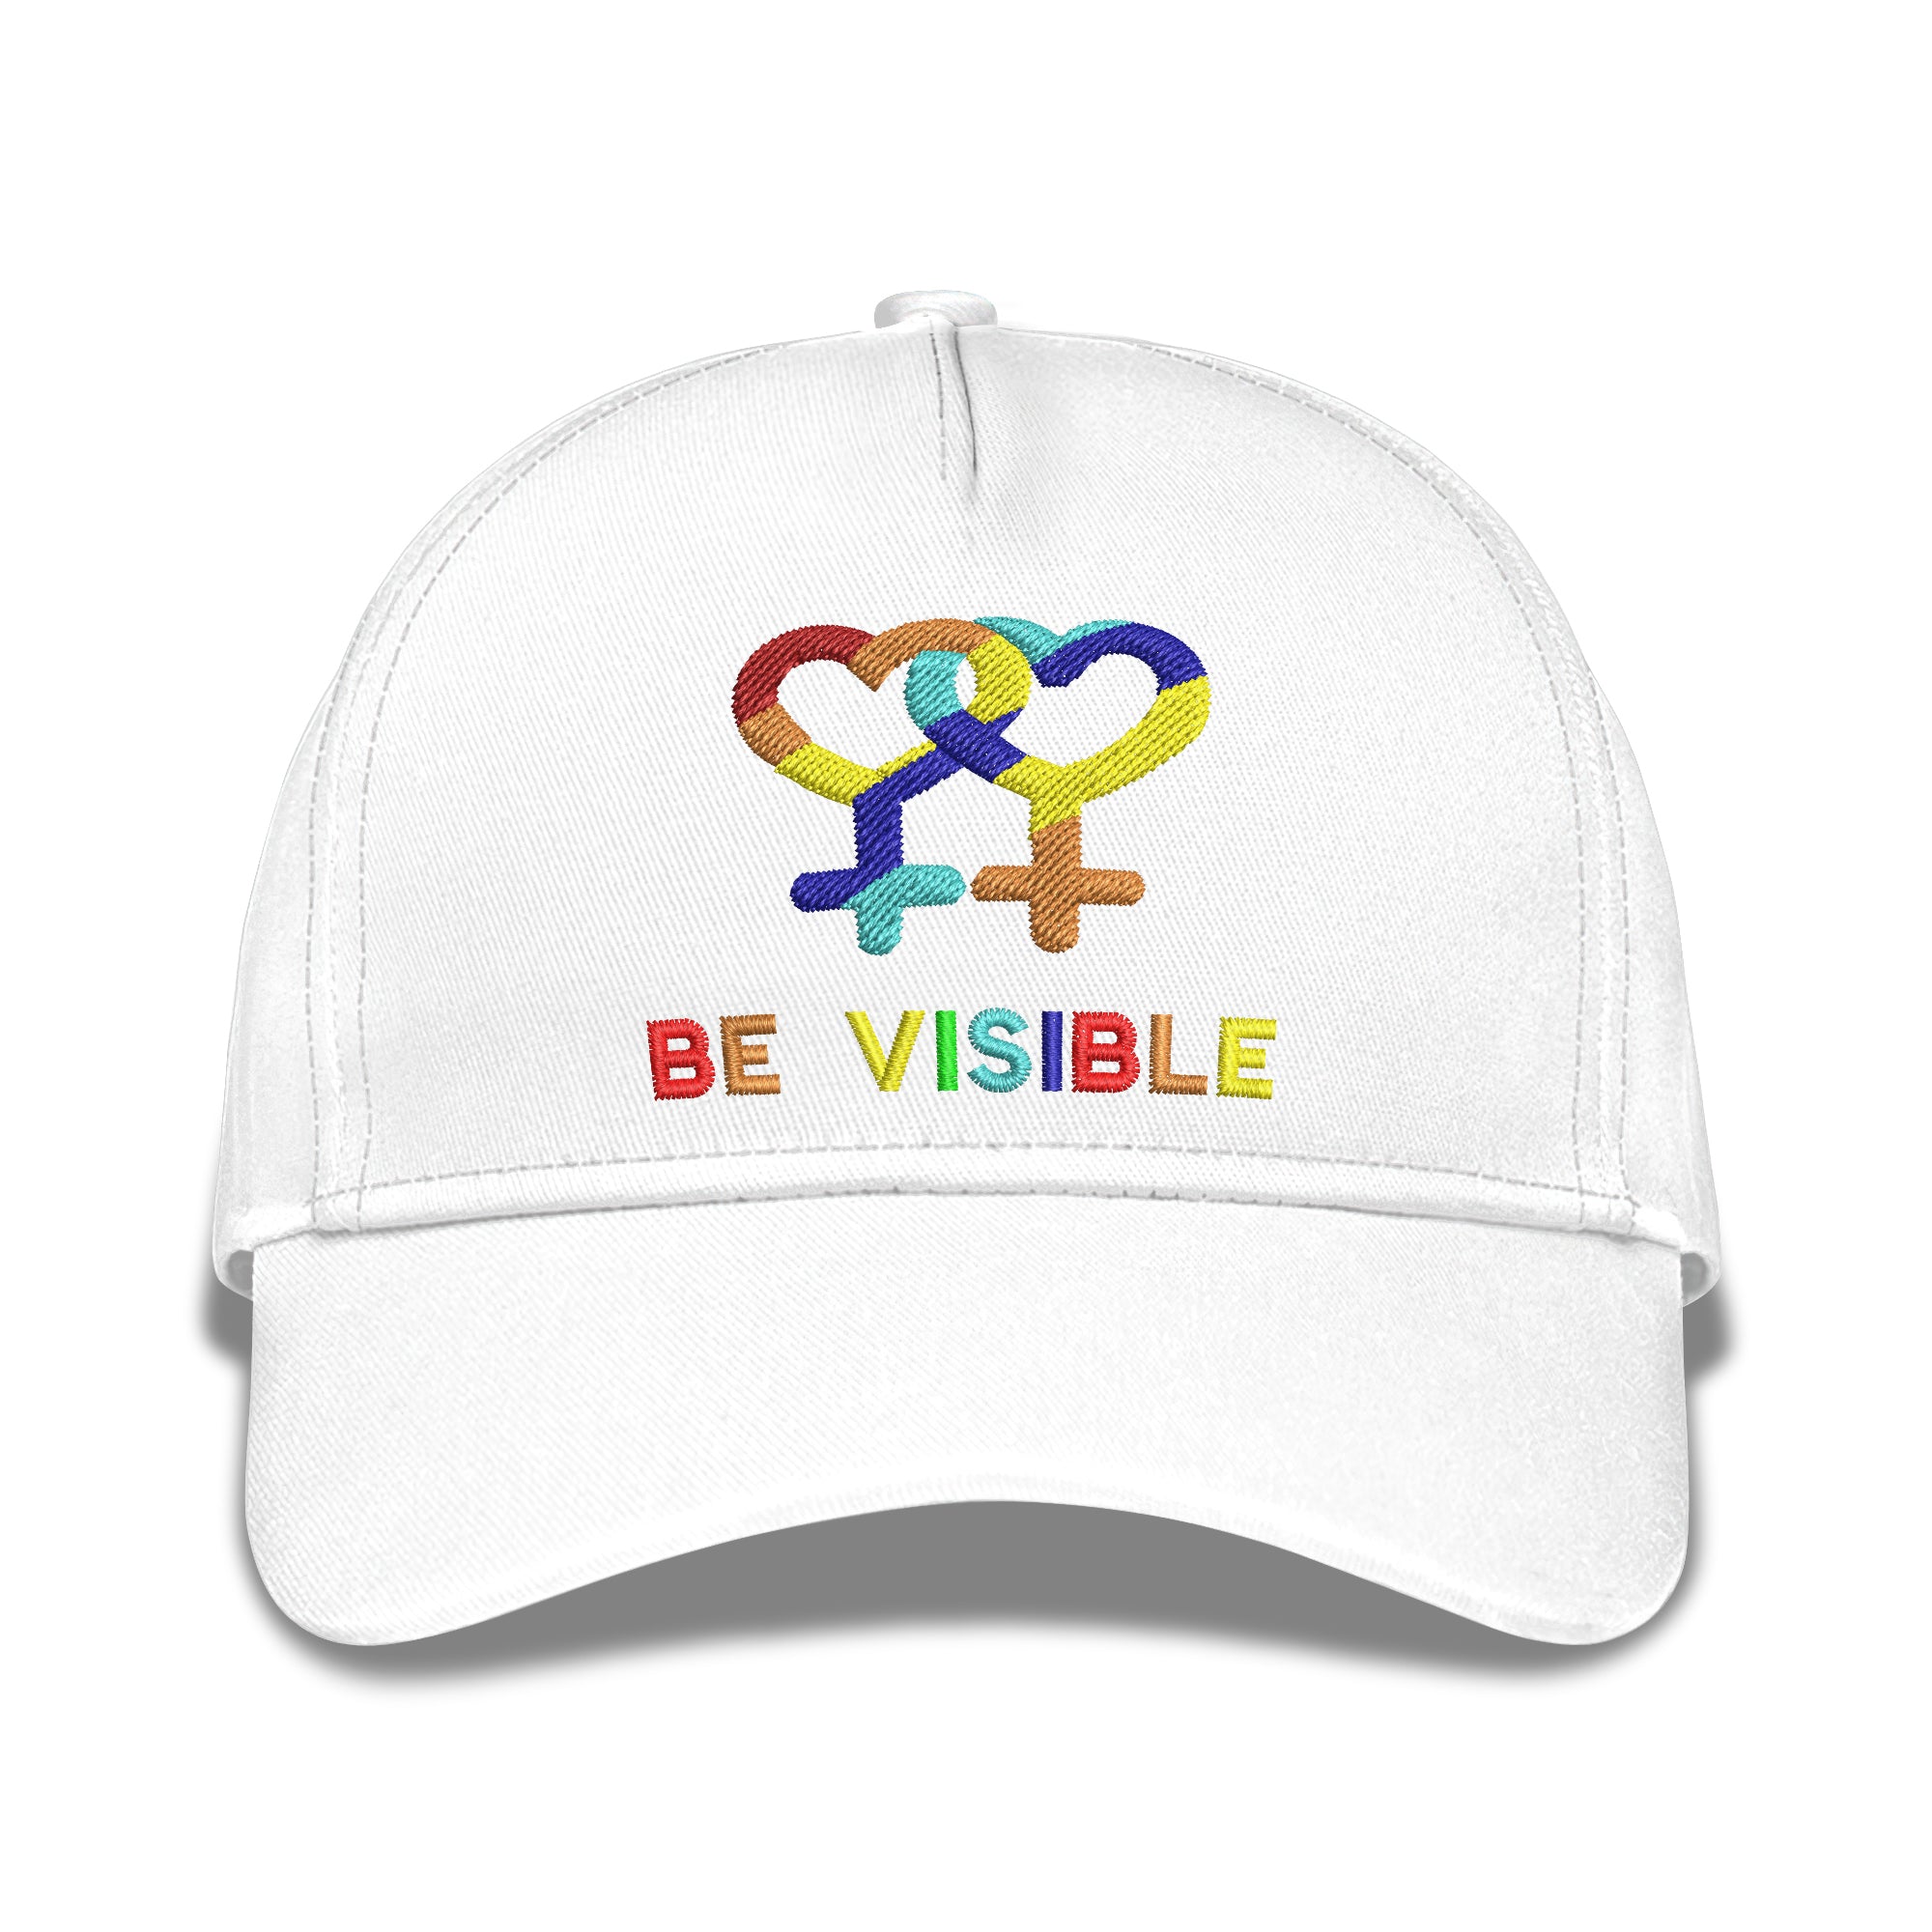 Be Visible Embroidered Baseball Caps